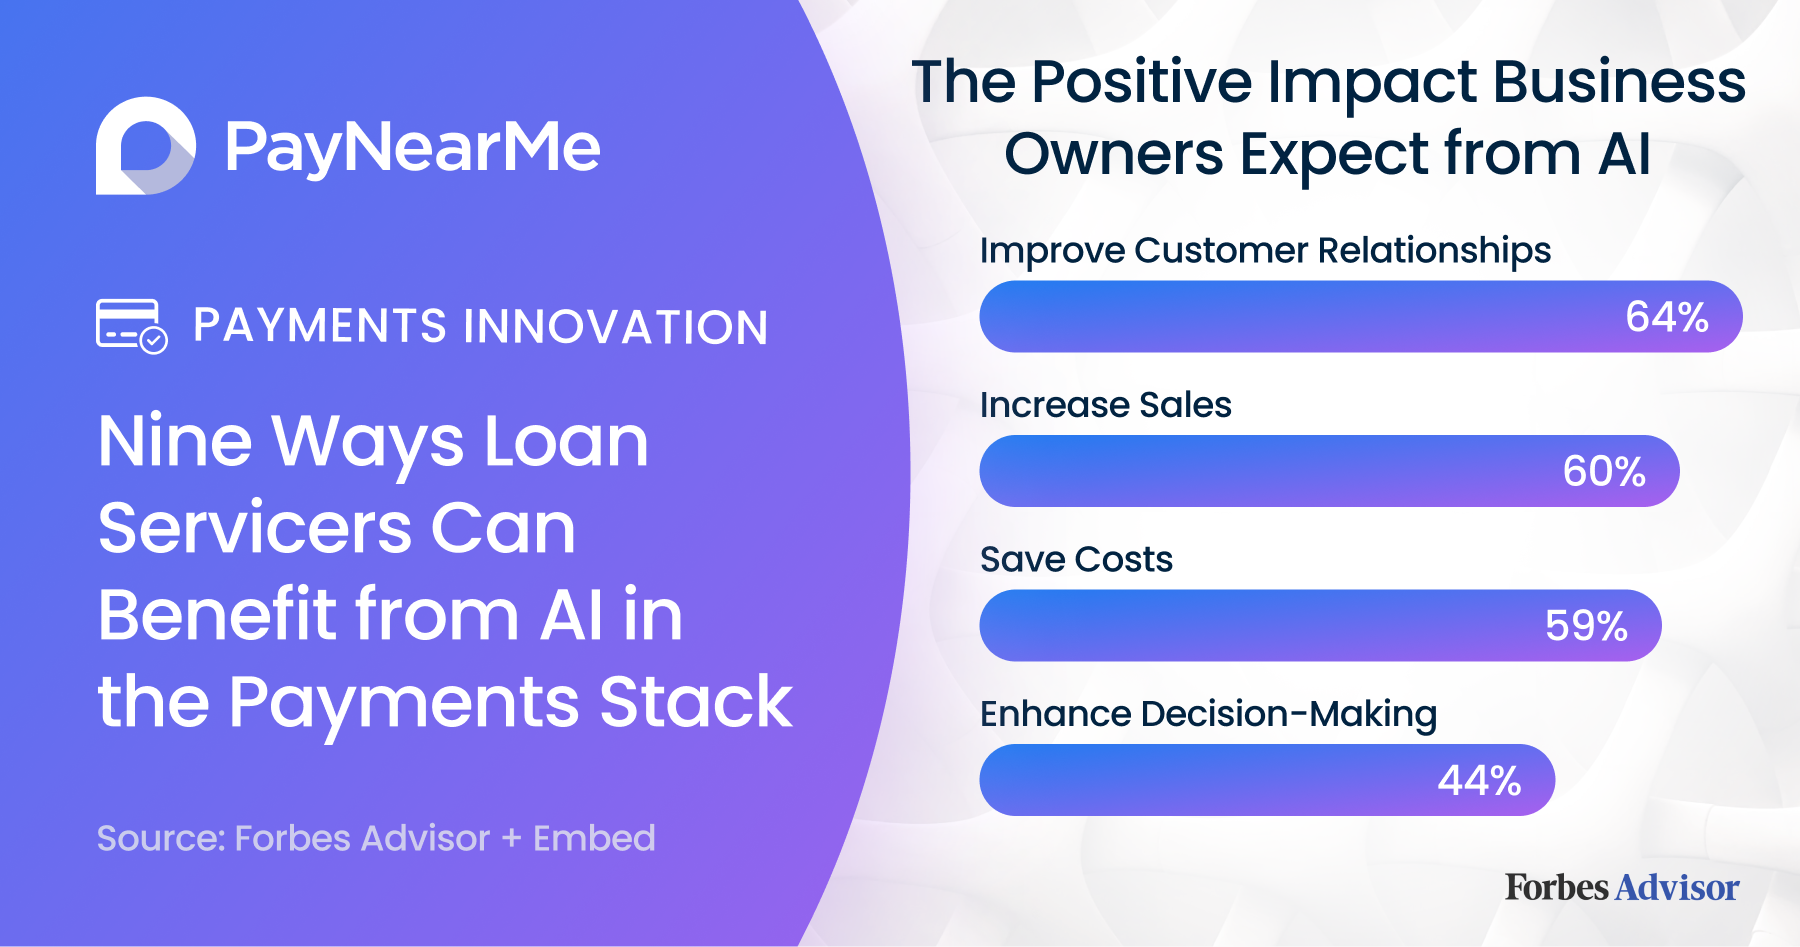 Nine Ways Loan Servicers Can Benefit from AI in the Payments Stack